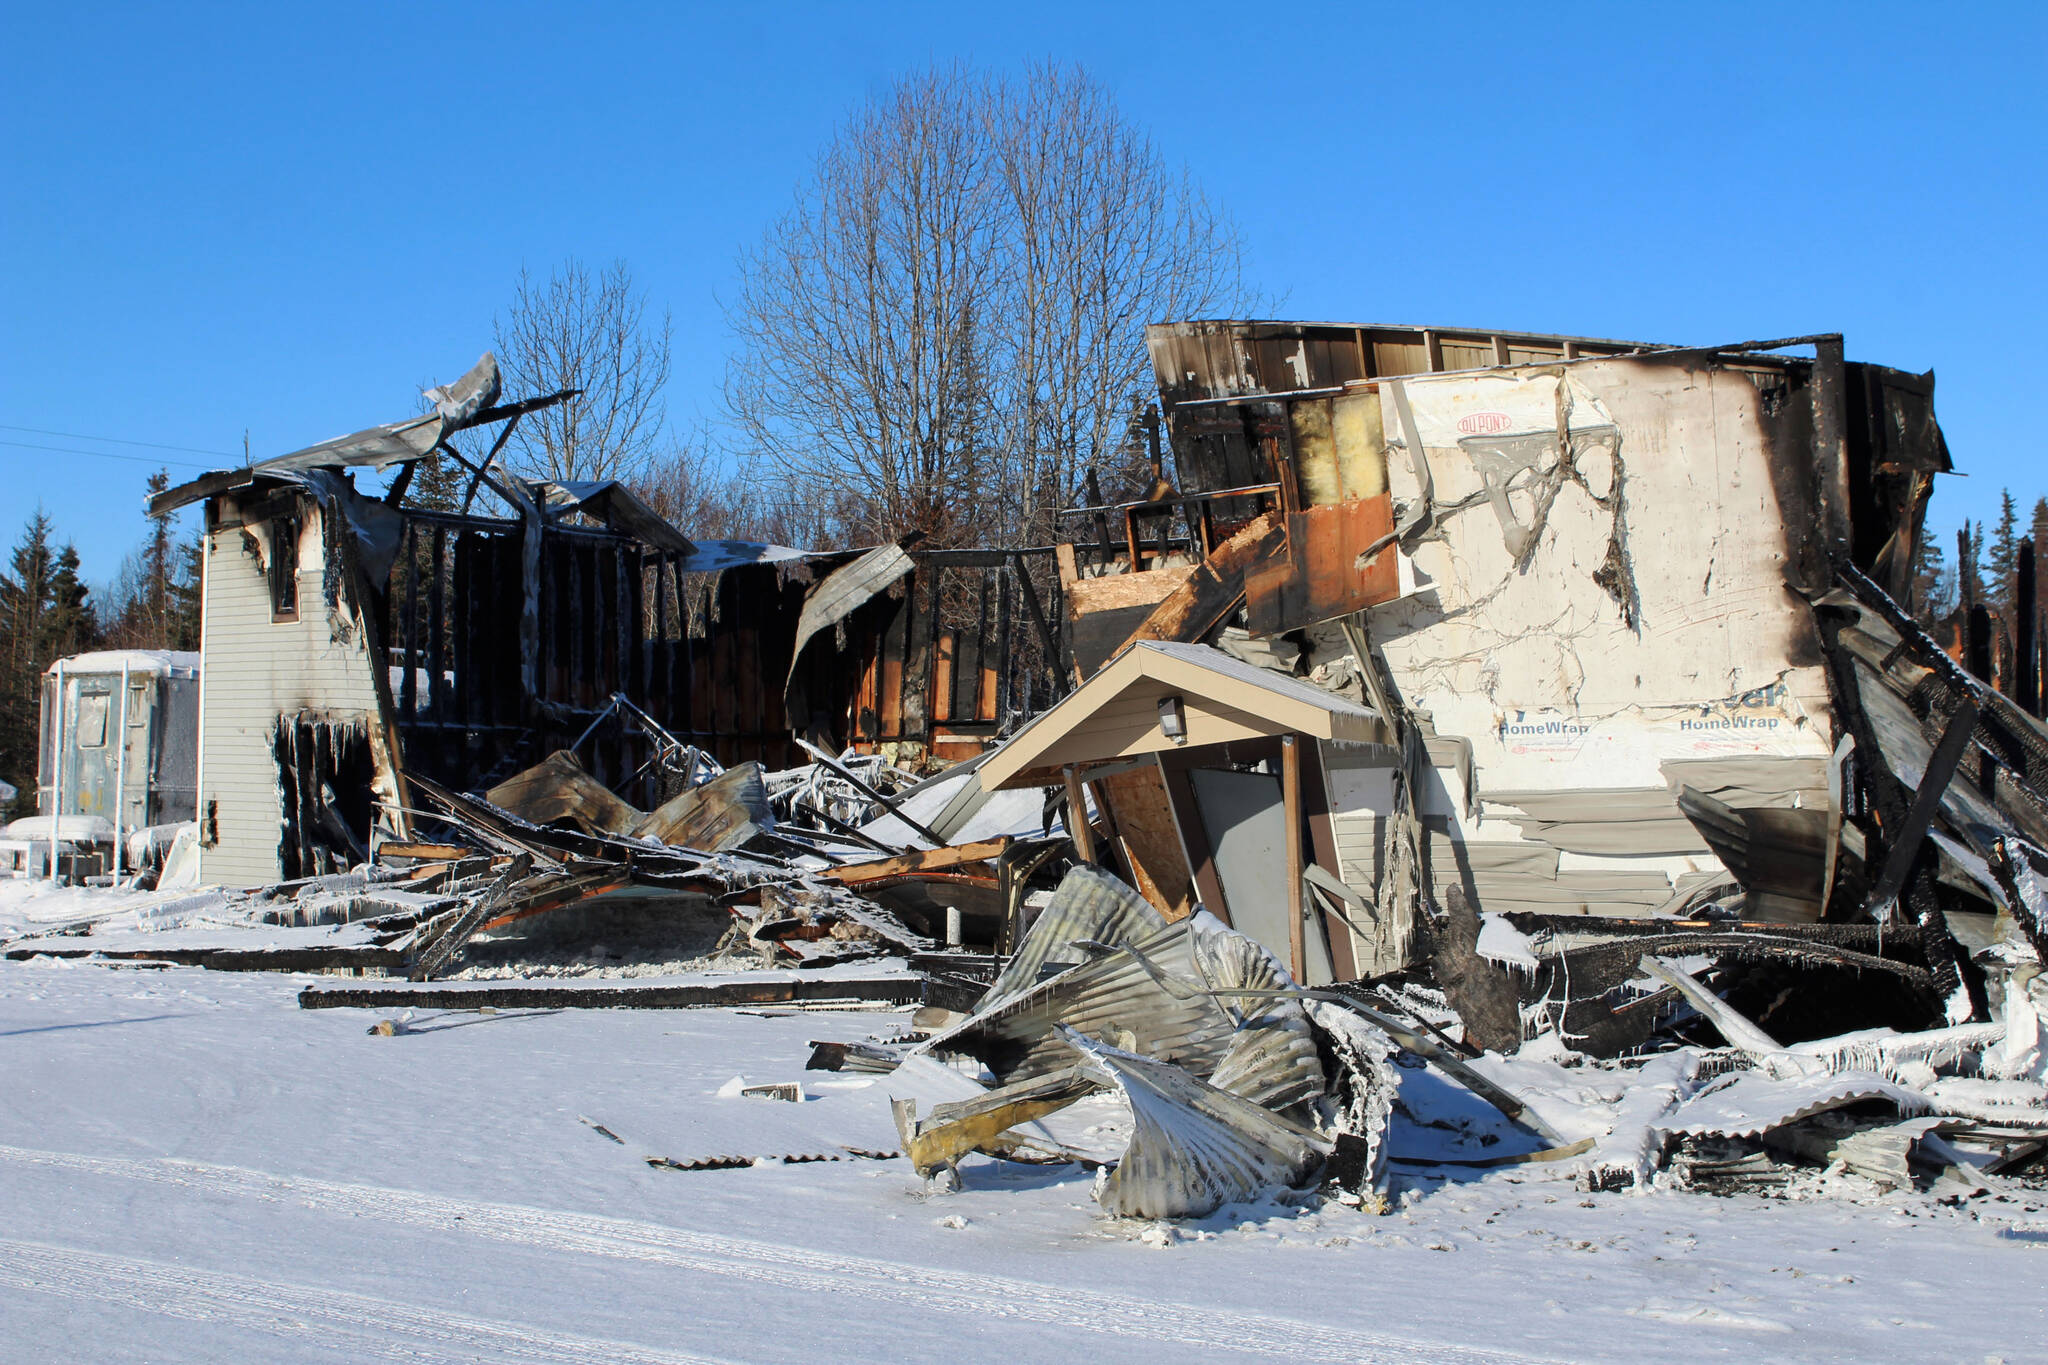 Ashlyn O’Hara / Peninsula Clarion
The remains of the Triumvirate Theatre in Nikiski are seen on Feb. 22.